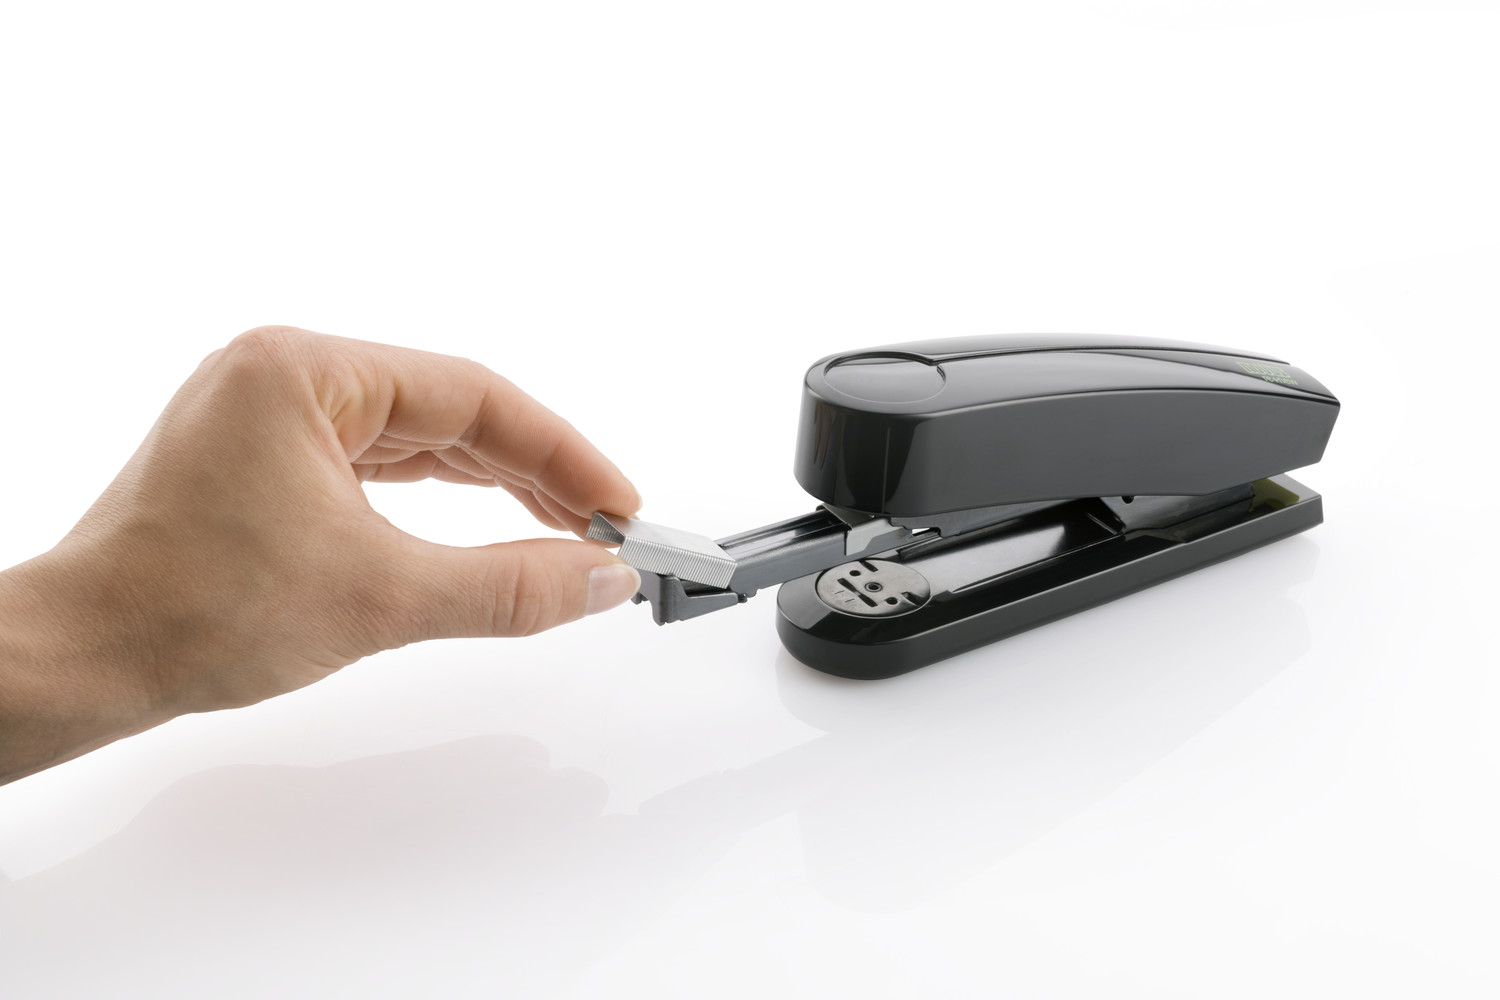 The spring loading mechanism makes filling these staplers a breeze. By pressing a button at the rear of the stapler, the staple magazine is released for front loading.